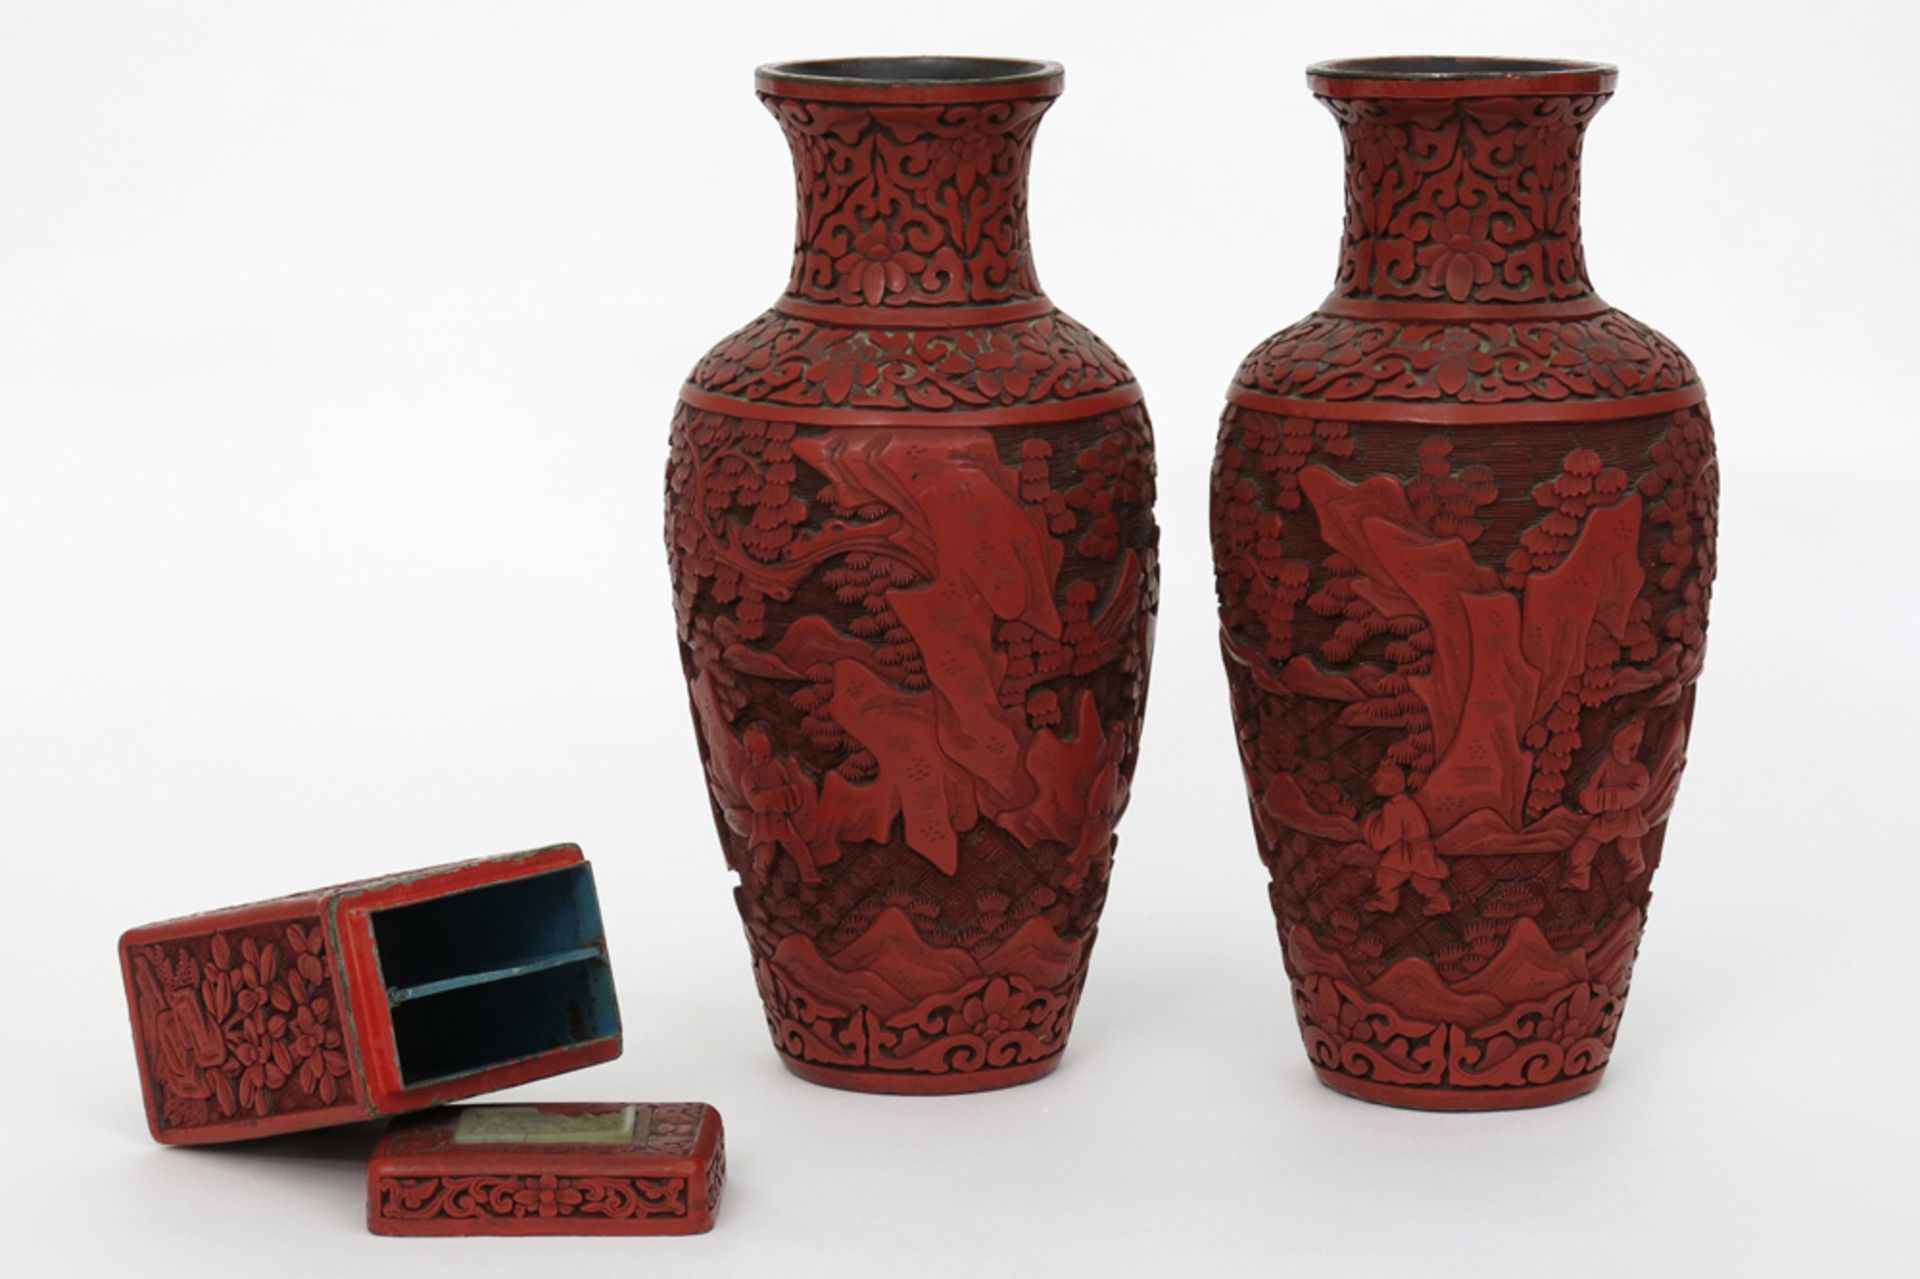 three pieces of Chinese lacquerware : a small box and a pair of vases || Lot (3) Chinees lakwerk met - Bild 2 aus 2